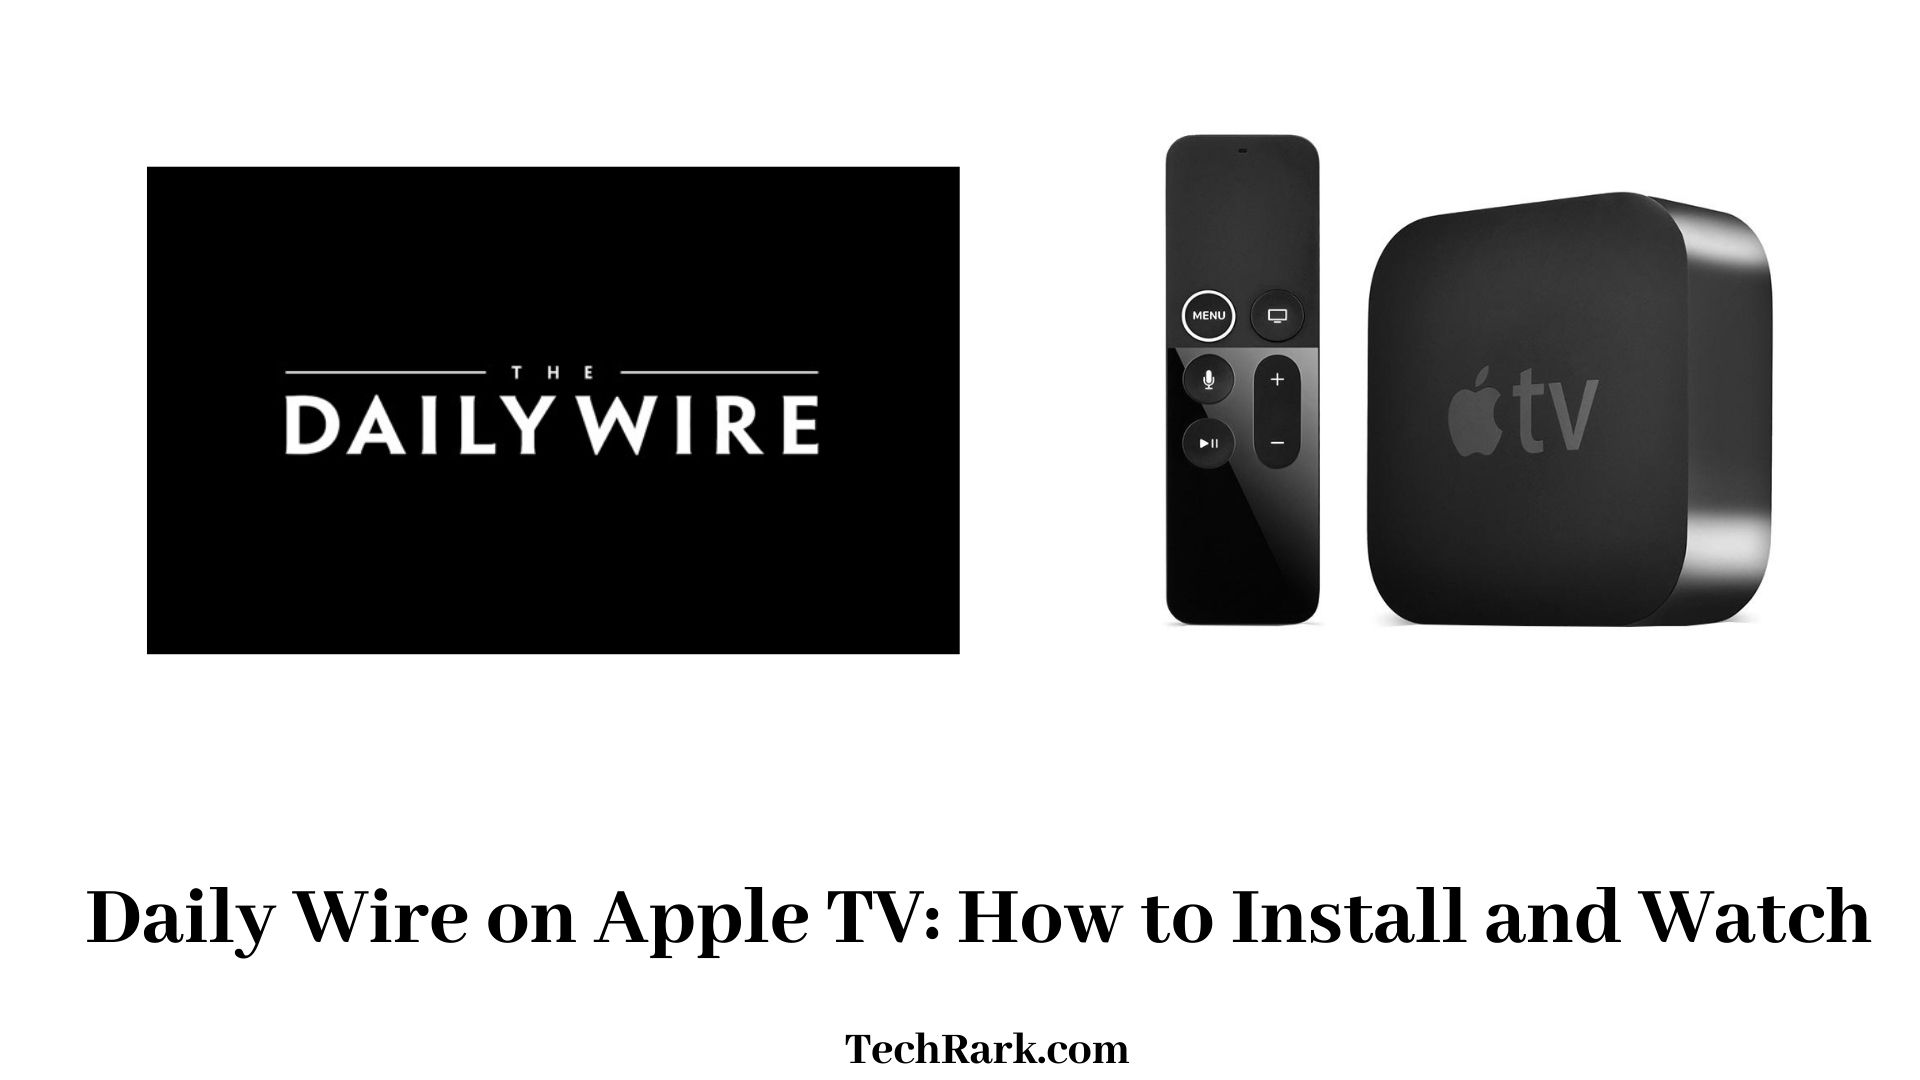 Daily Wire on Apple TV